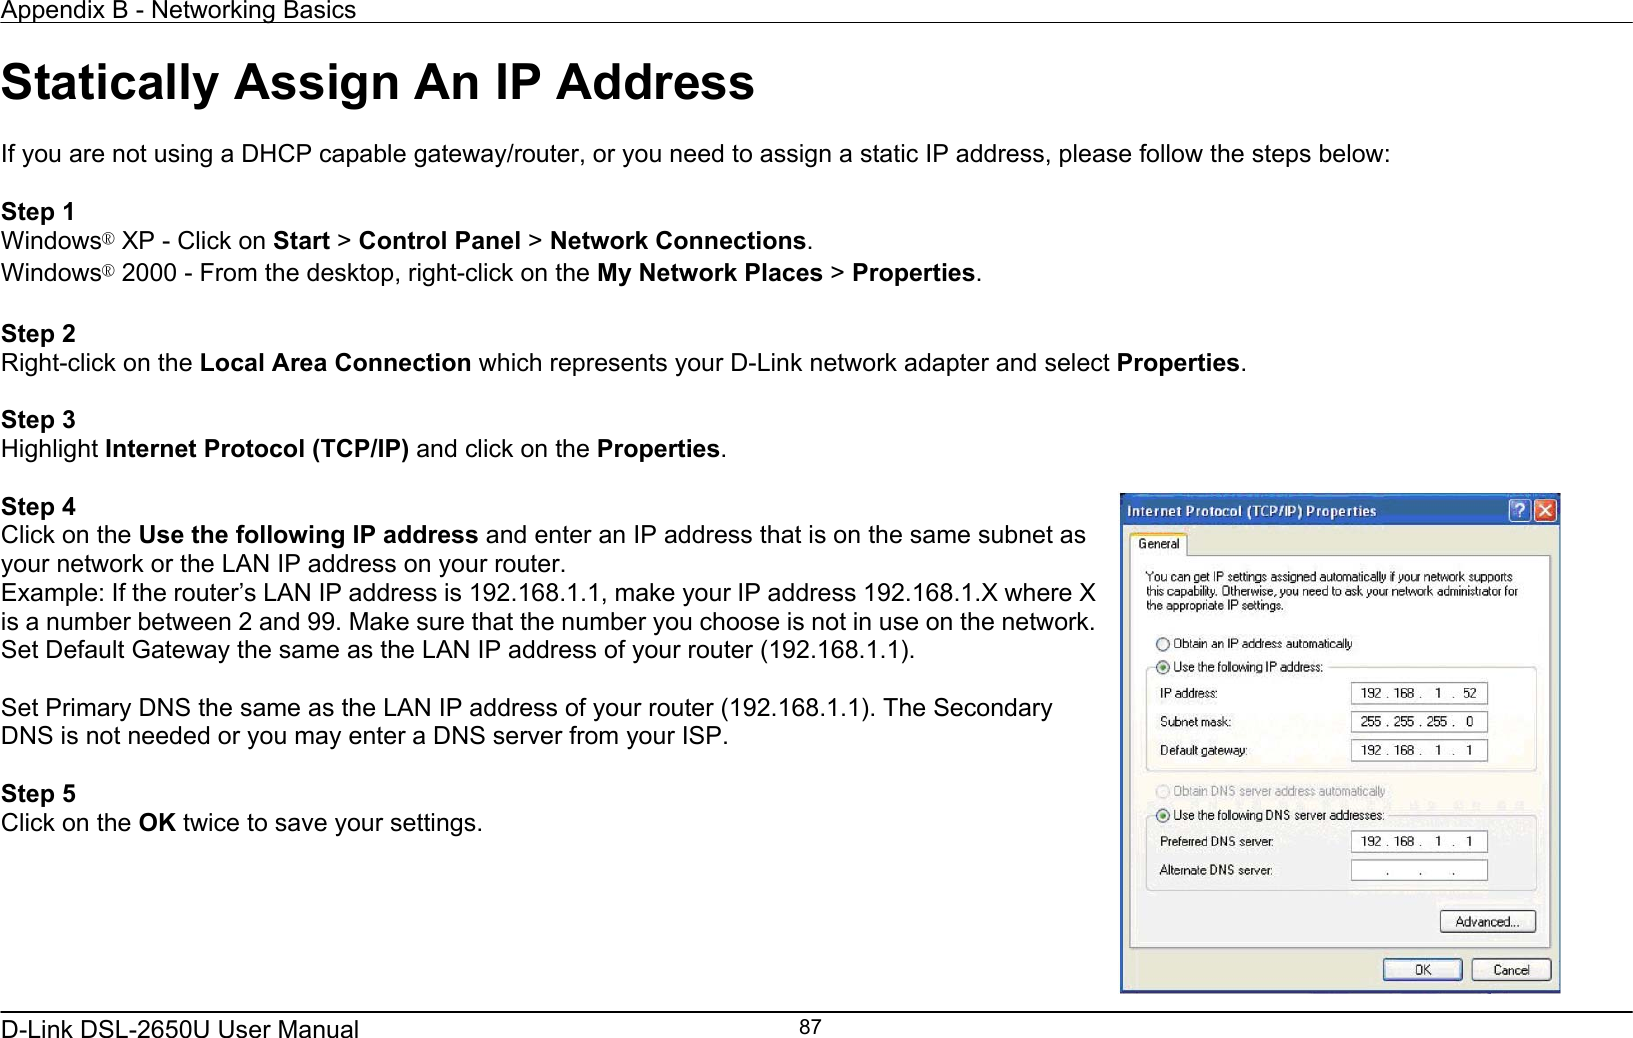 Appendix B - Networking Basics   D-Link DSL-2650U User Manual    87Statically Assign An IP Address  If you are not using a DHCP capable gateway/router, or you need to assign a static IP address, please follow the steps below:  Step 1 Windows® XP - Click on Start &gt; Control Panel &gt; Network Connections. Windows® 2000 - From the desktop, right-click on the My Network Places &gt; Properties.  Step 2 Right-click on the Local Area Connection which represents your D-Link network adapter and select Properties.  Step 3 Highlight Internet Protocol (TCP/IP) and click on the Properties.  Step 4 Click on the Use the following IP address and enter an IP address that is on the same subnet as your network or the LAN IP address on your router. Example: If the router’s LAN IP address is 192.168.1.1, make your IP address 192.168.1.X where X is a number between 2 and 99. Make sure that the number you choose is not in use on the network. Set Default Gateway the same as the LAN IP address of your router (192.168.1.1).  Set Primary DNS the same as the LAN IP address of your router (192.168.1.1). The Secondary DNS is not needed or you may enter a DNS server from your ISP.  Step 5 Click on the OK twice to save your settings.   